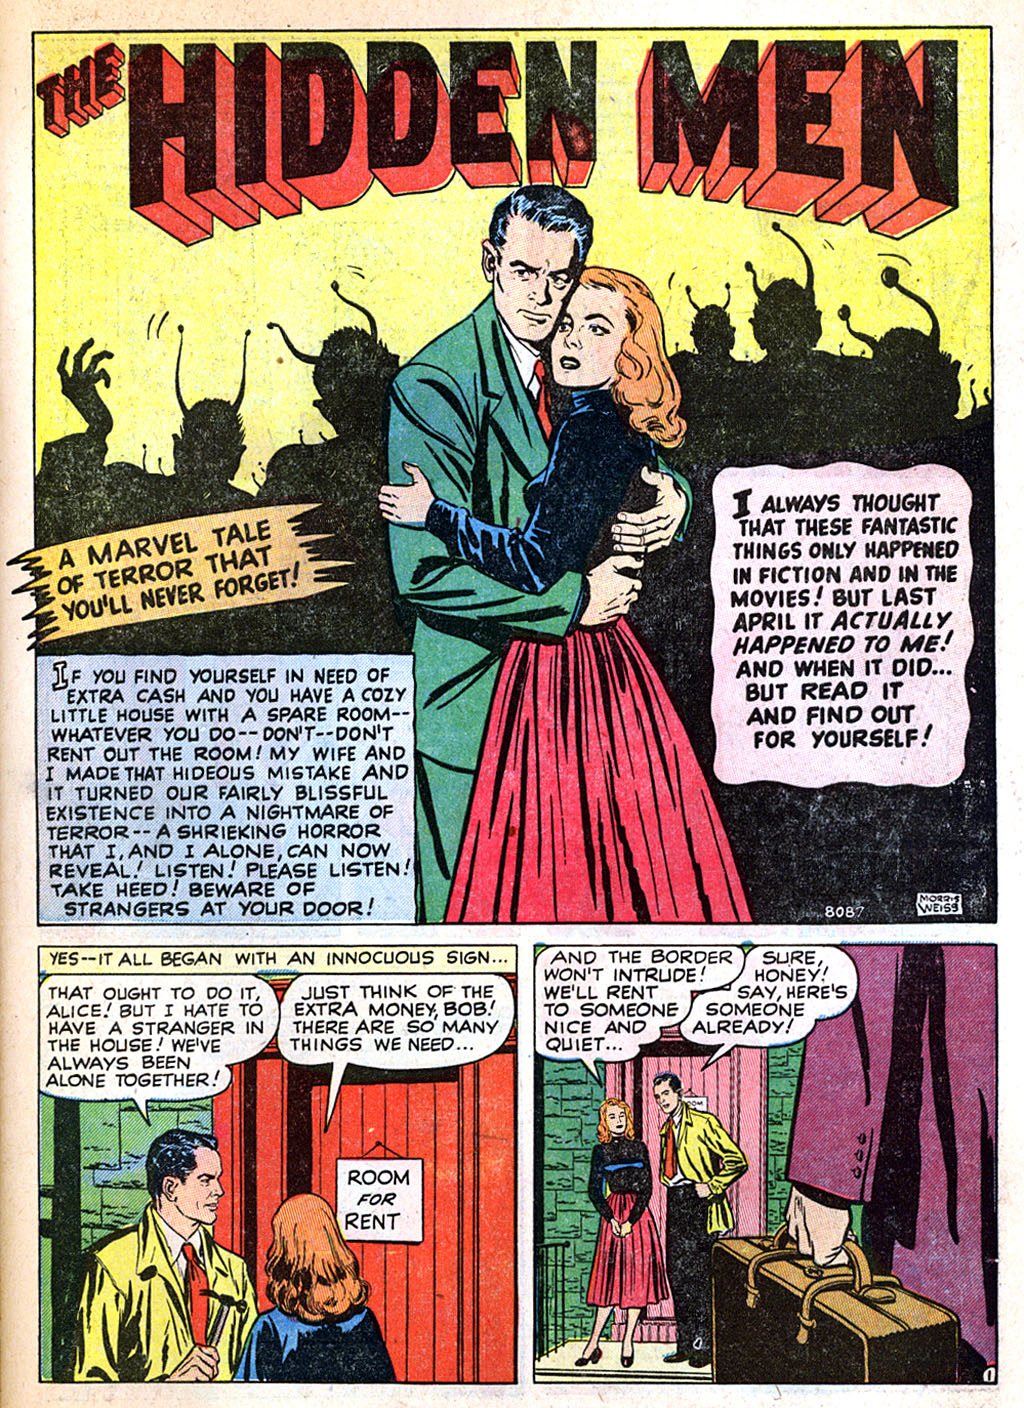 Marvel Tales (1949) 101 Page 26